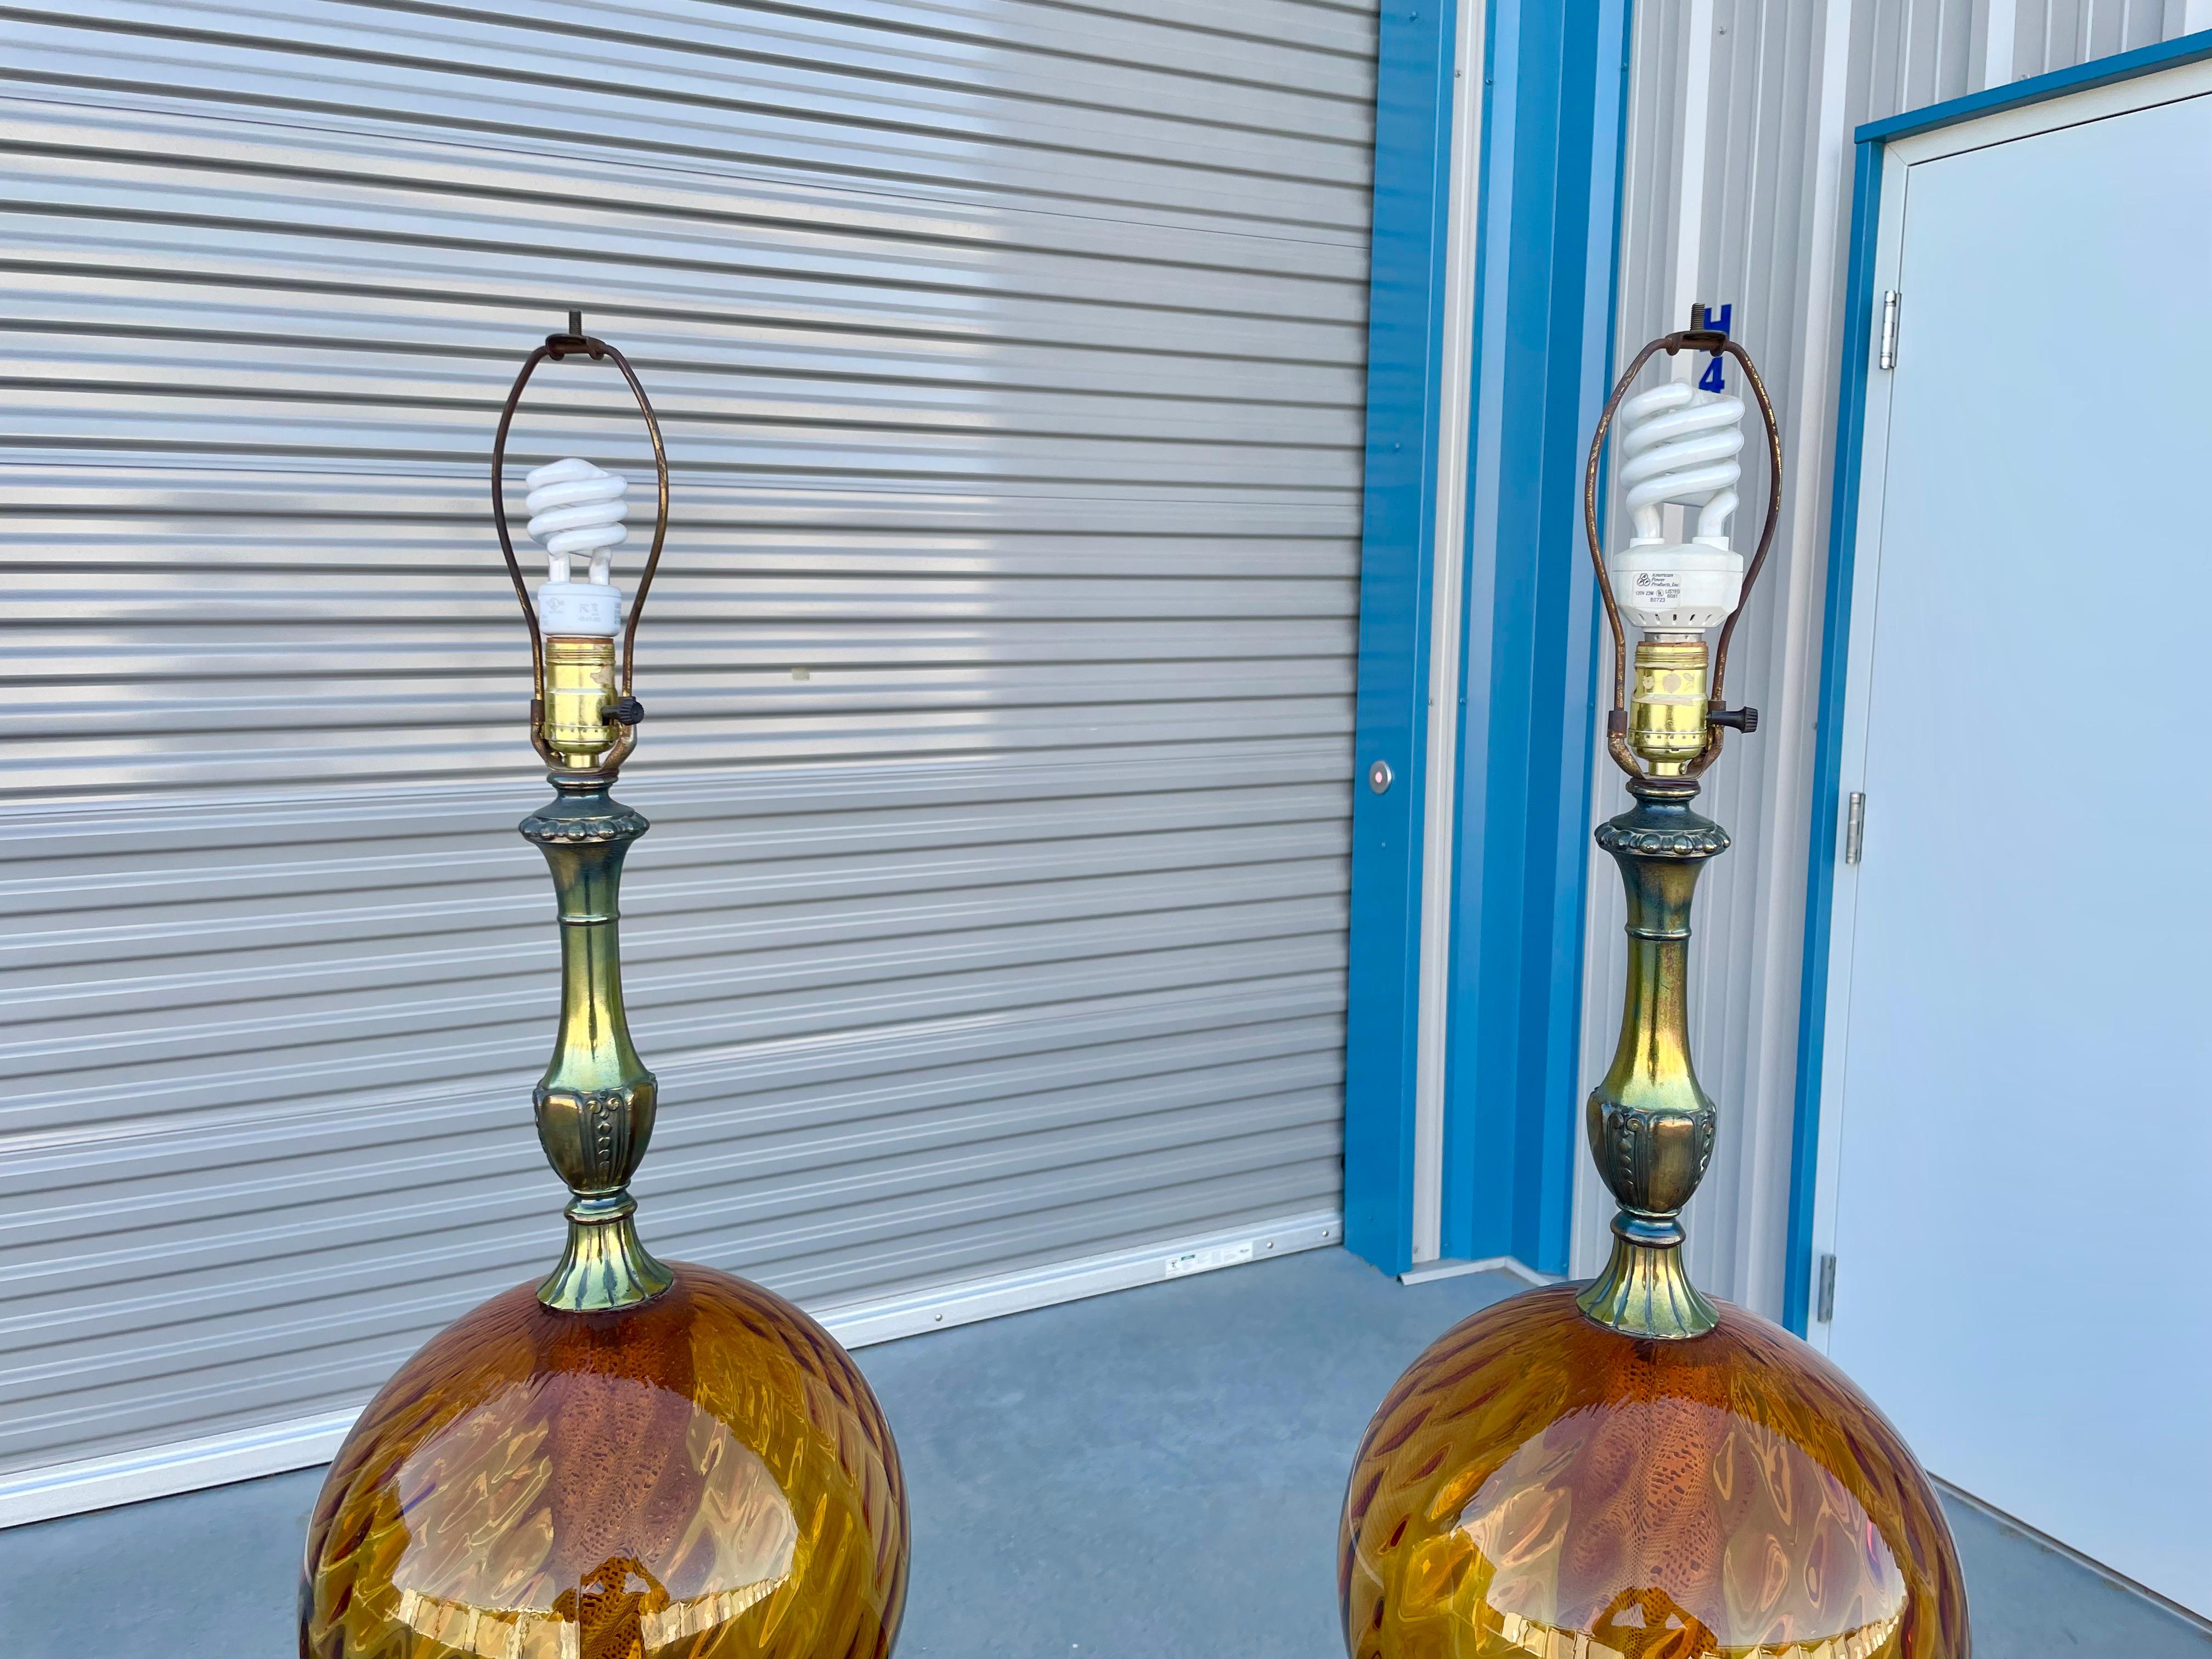 Vintage pair of glass sphere lamps designed and manufactured in the United States, circa 1970s. These beautiful vintage lamps features a sphere glass design on top of a metal base giving an elegant vintage style to it, perfect addition for your home